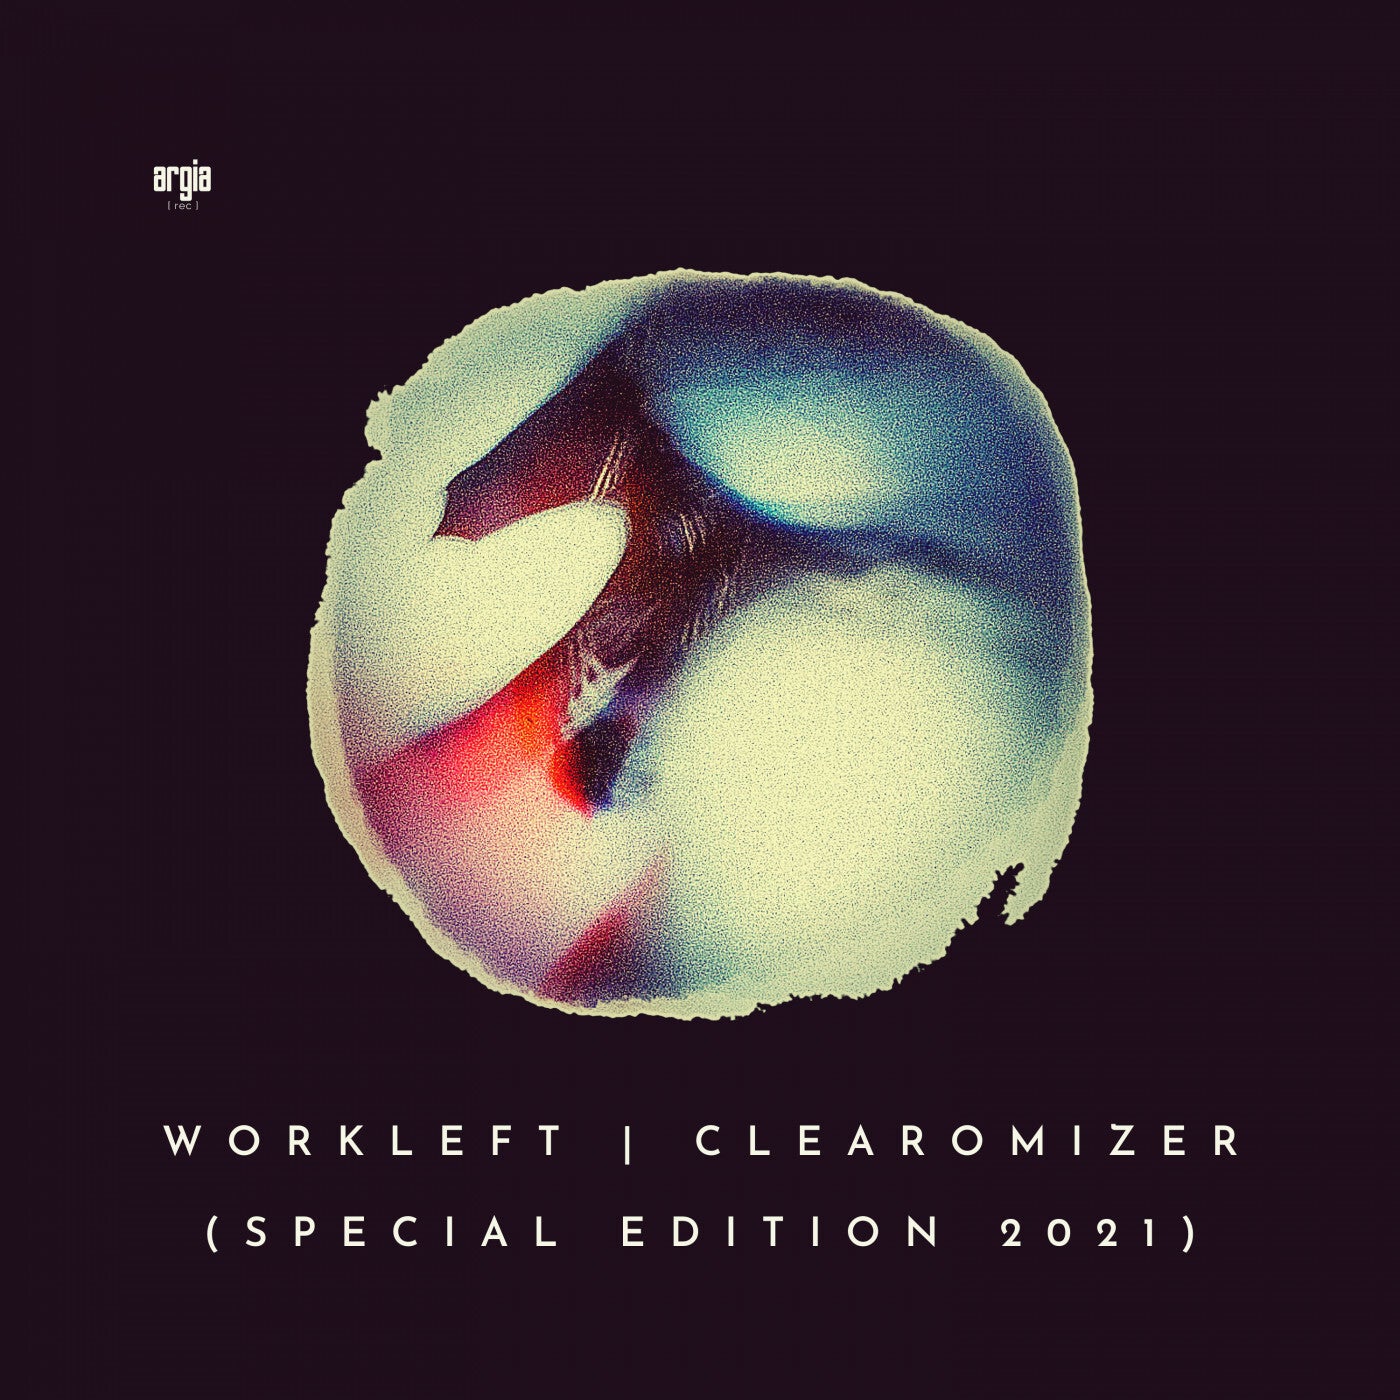 Clearomizer (Special Edition 2021)